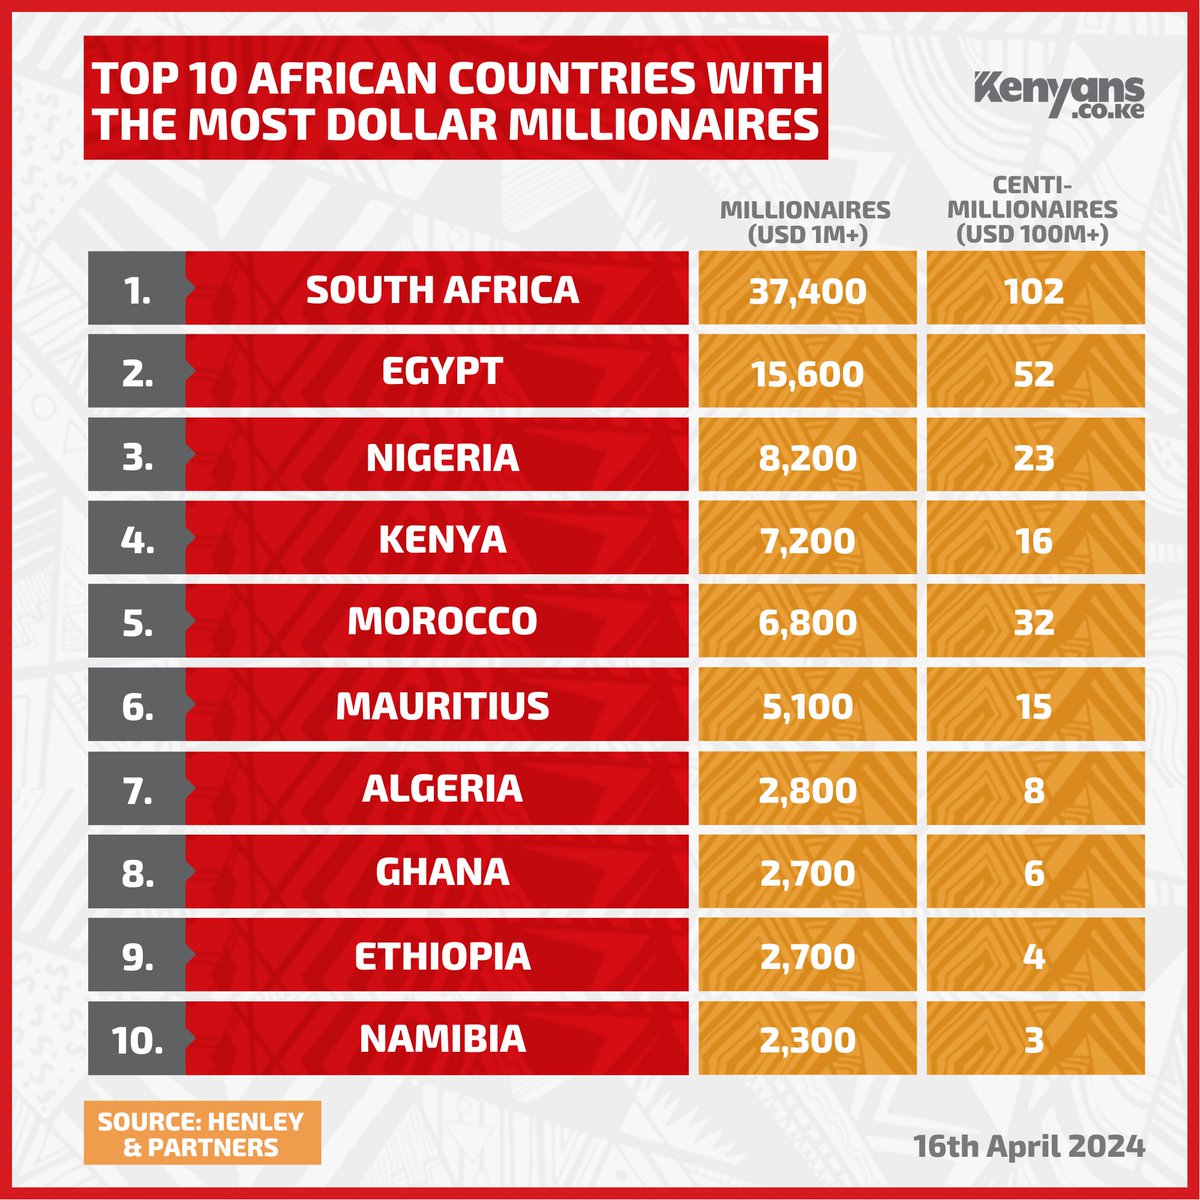 Kenya is 4th behind South Africa, Egypt and Nigeria in regards to the number of dollar millionaires living in the country #KenyansData